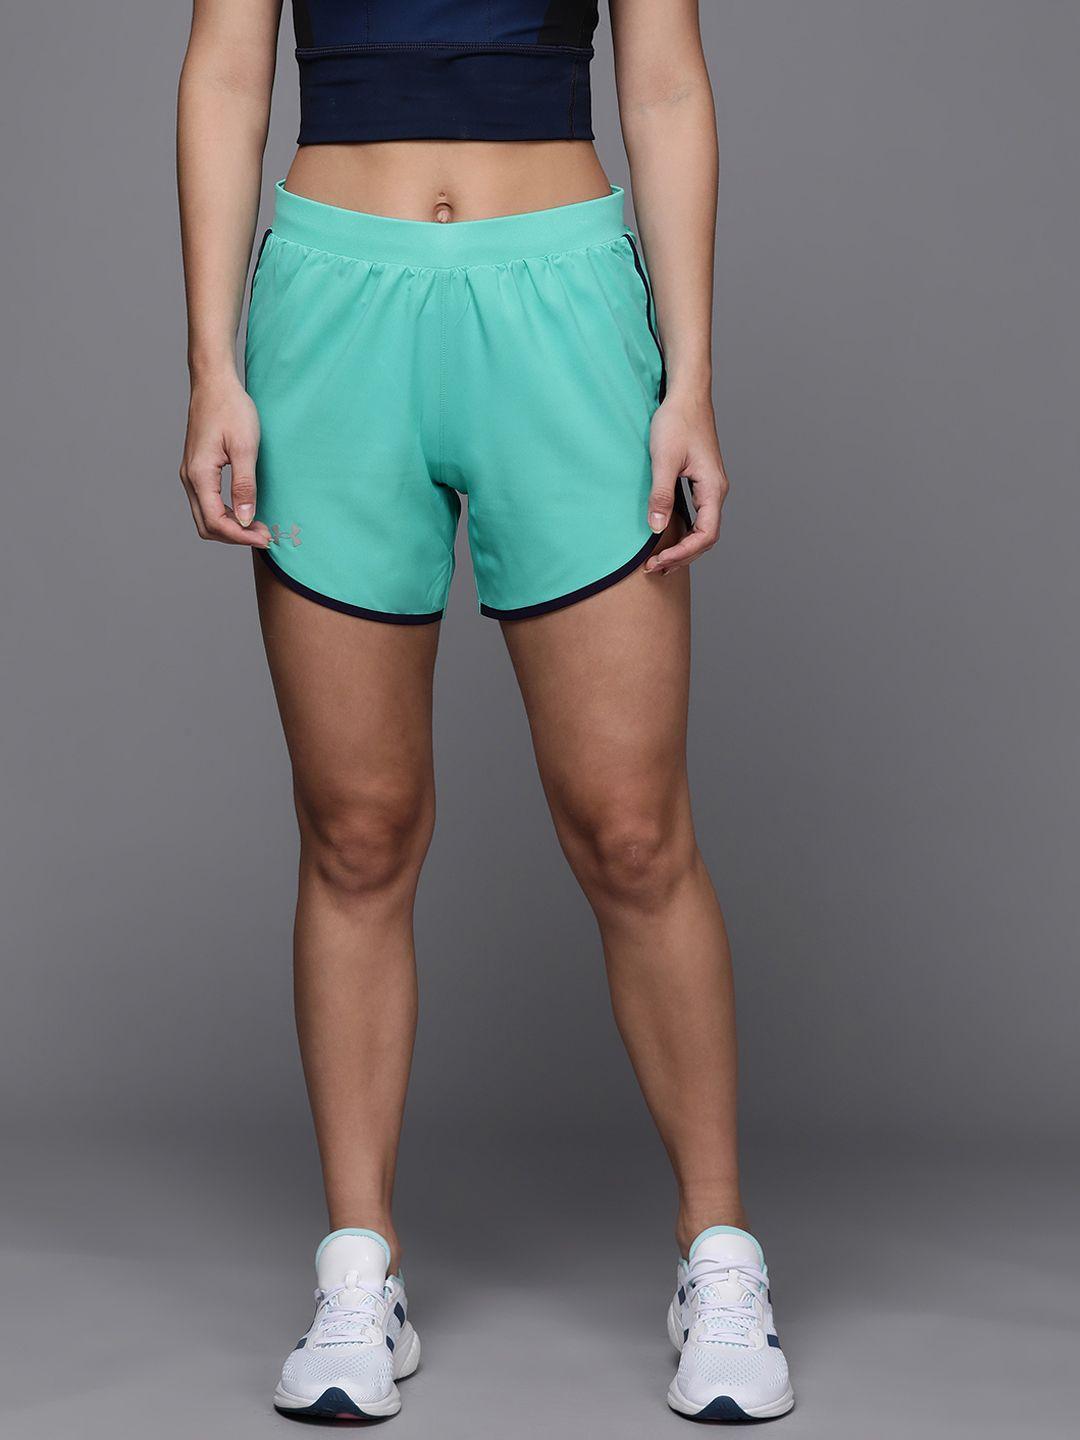 under-armour-women-sea-green-fly-by-elite-5''-low-rise-running-sports-shorts